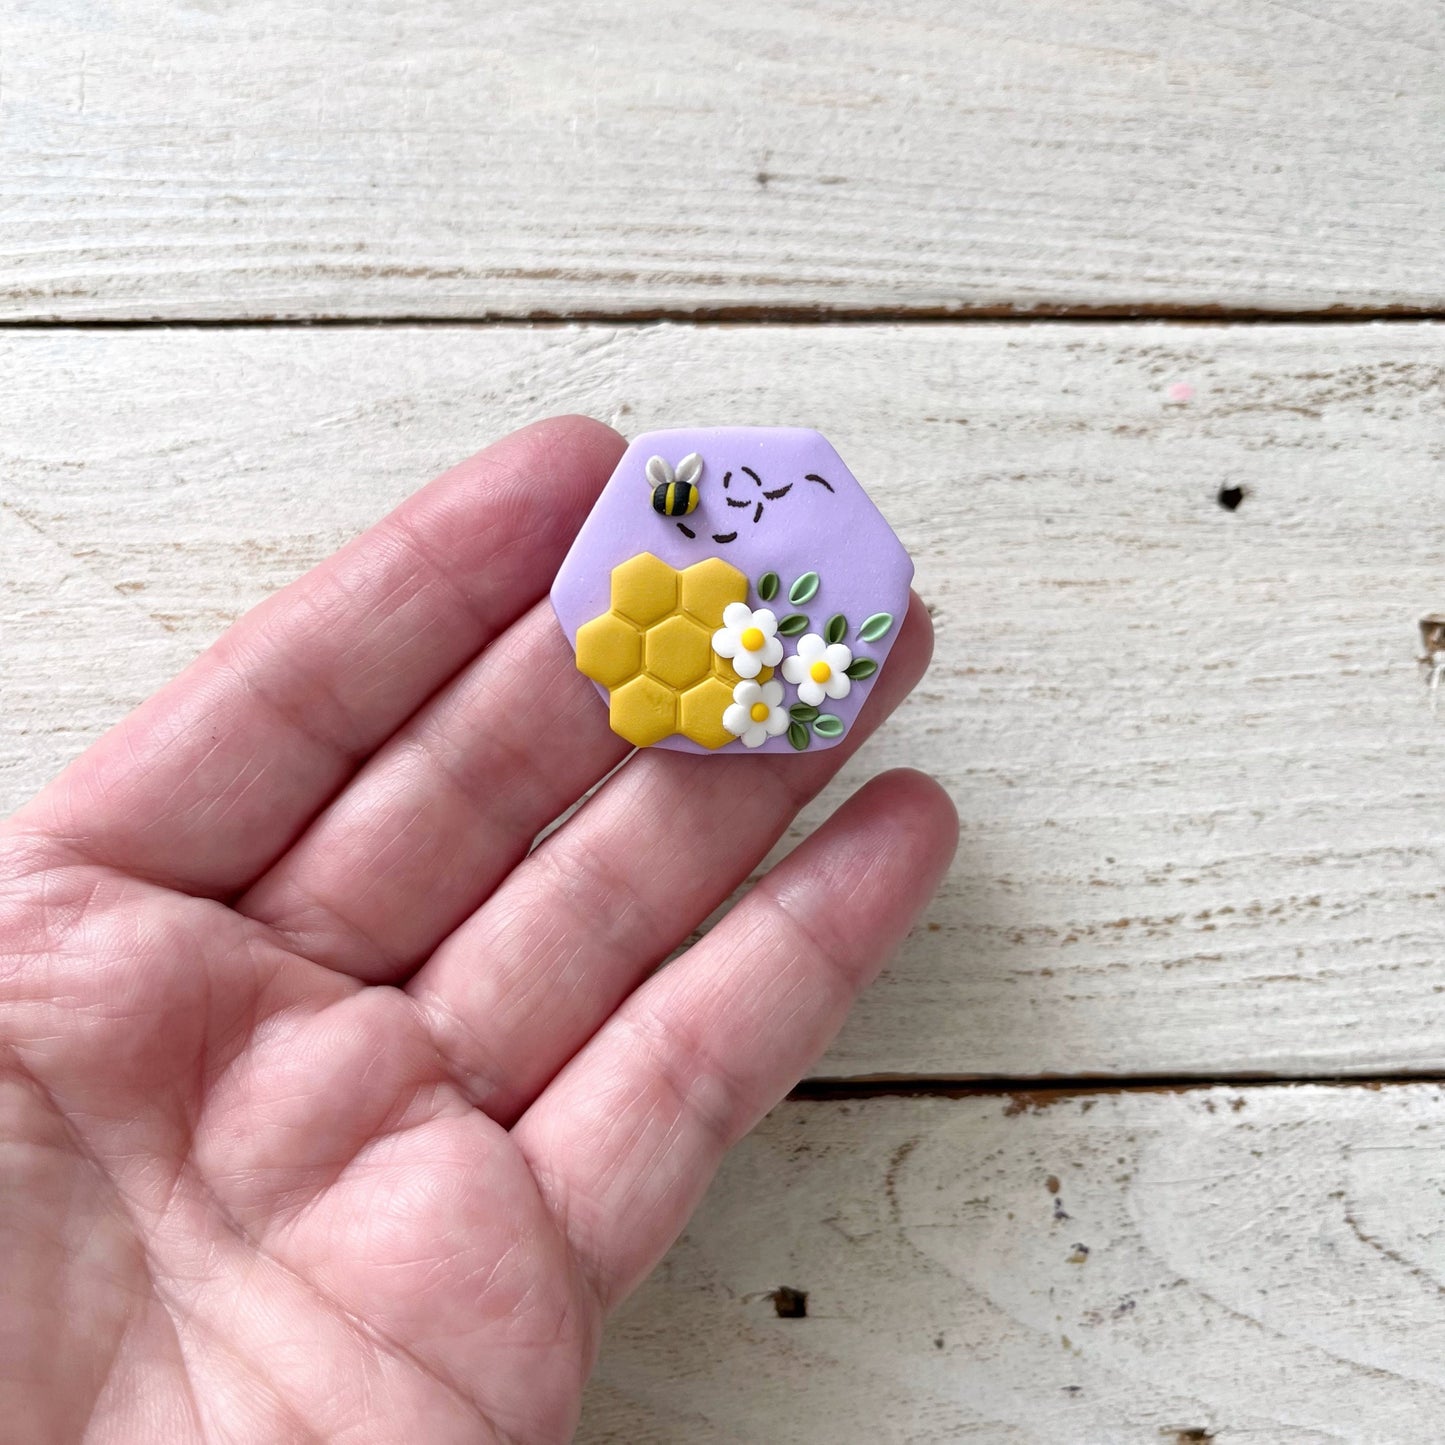 Lilac honeycomb bumble bee needle minder, sewing needle magnet, cross stitch embroidery tools